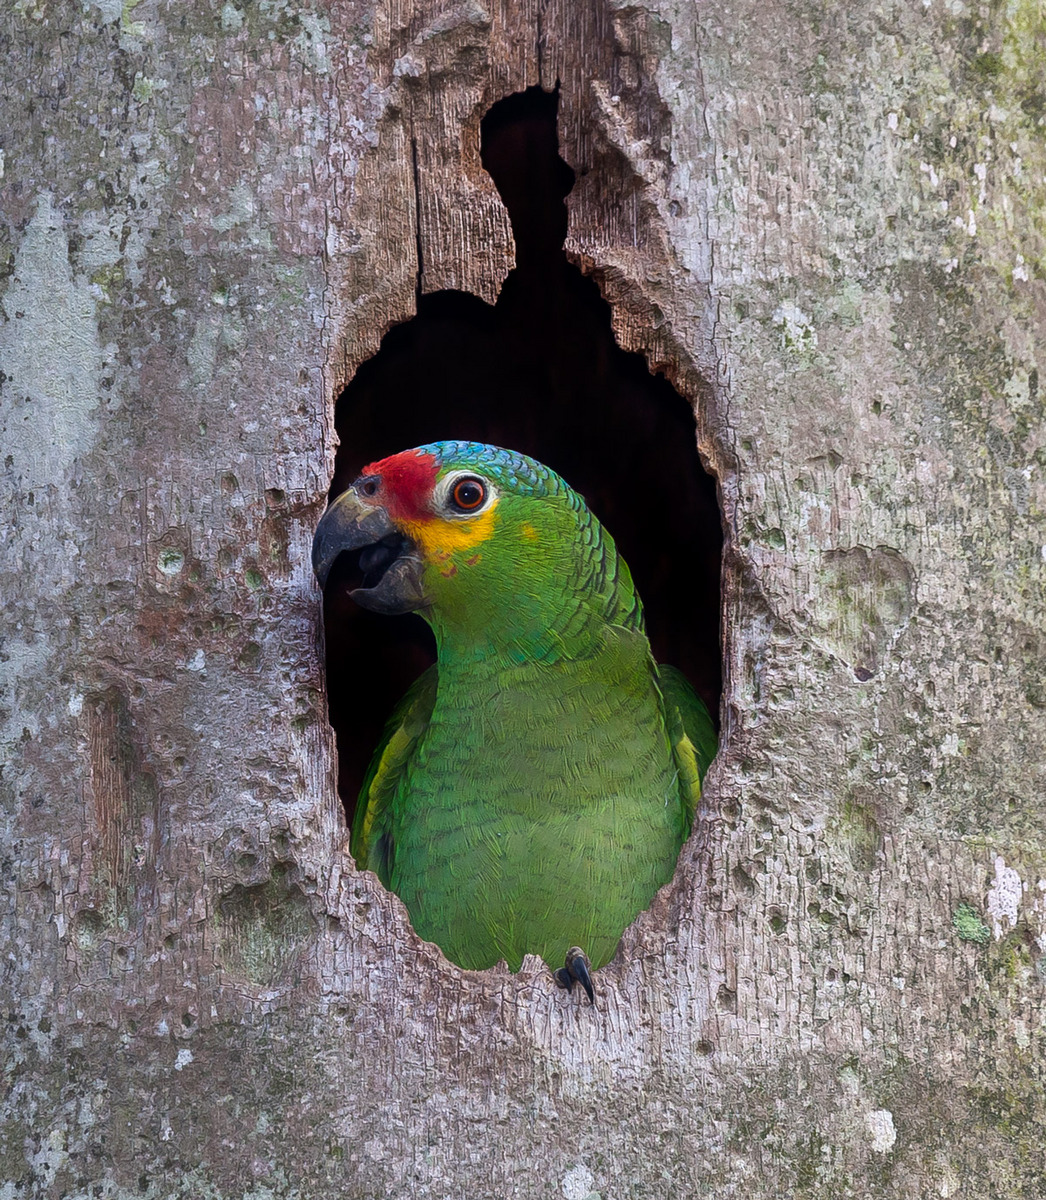 It's breeding season for the Red-Lored Parrots of Possum Point! I love watching them inspect tree cavities for potential nesting sites